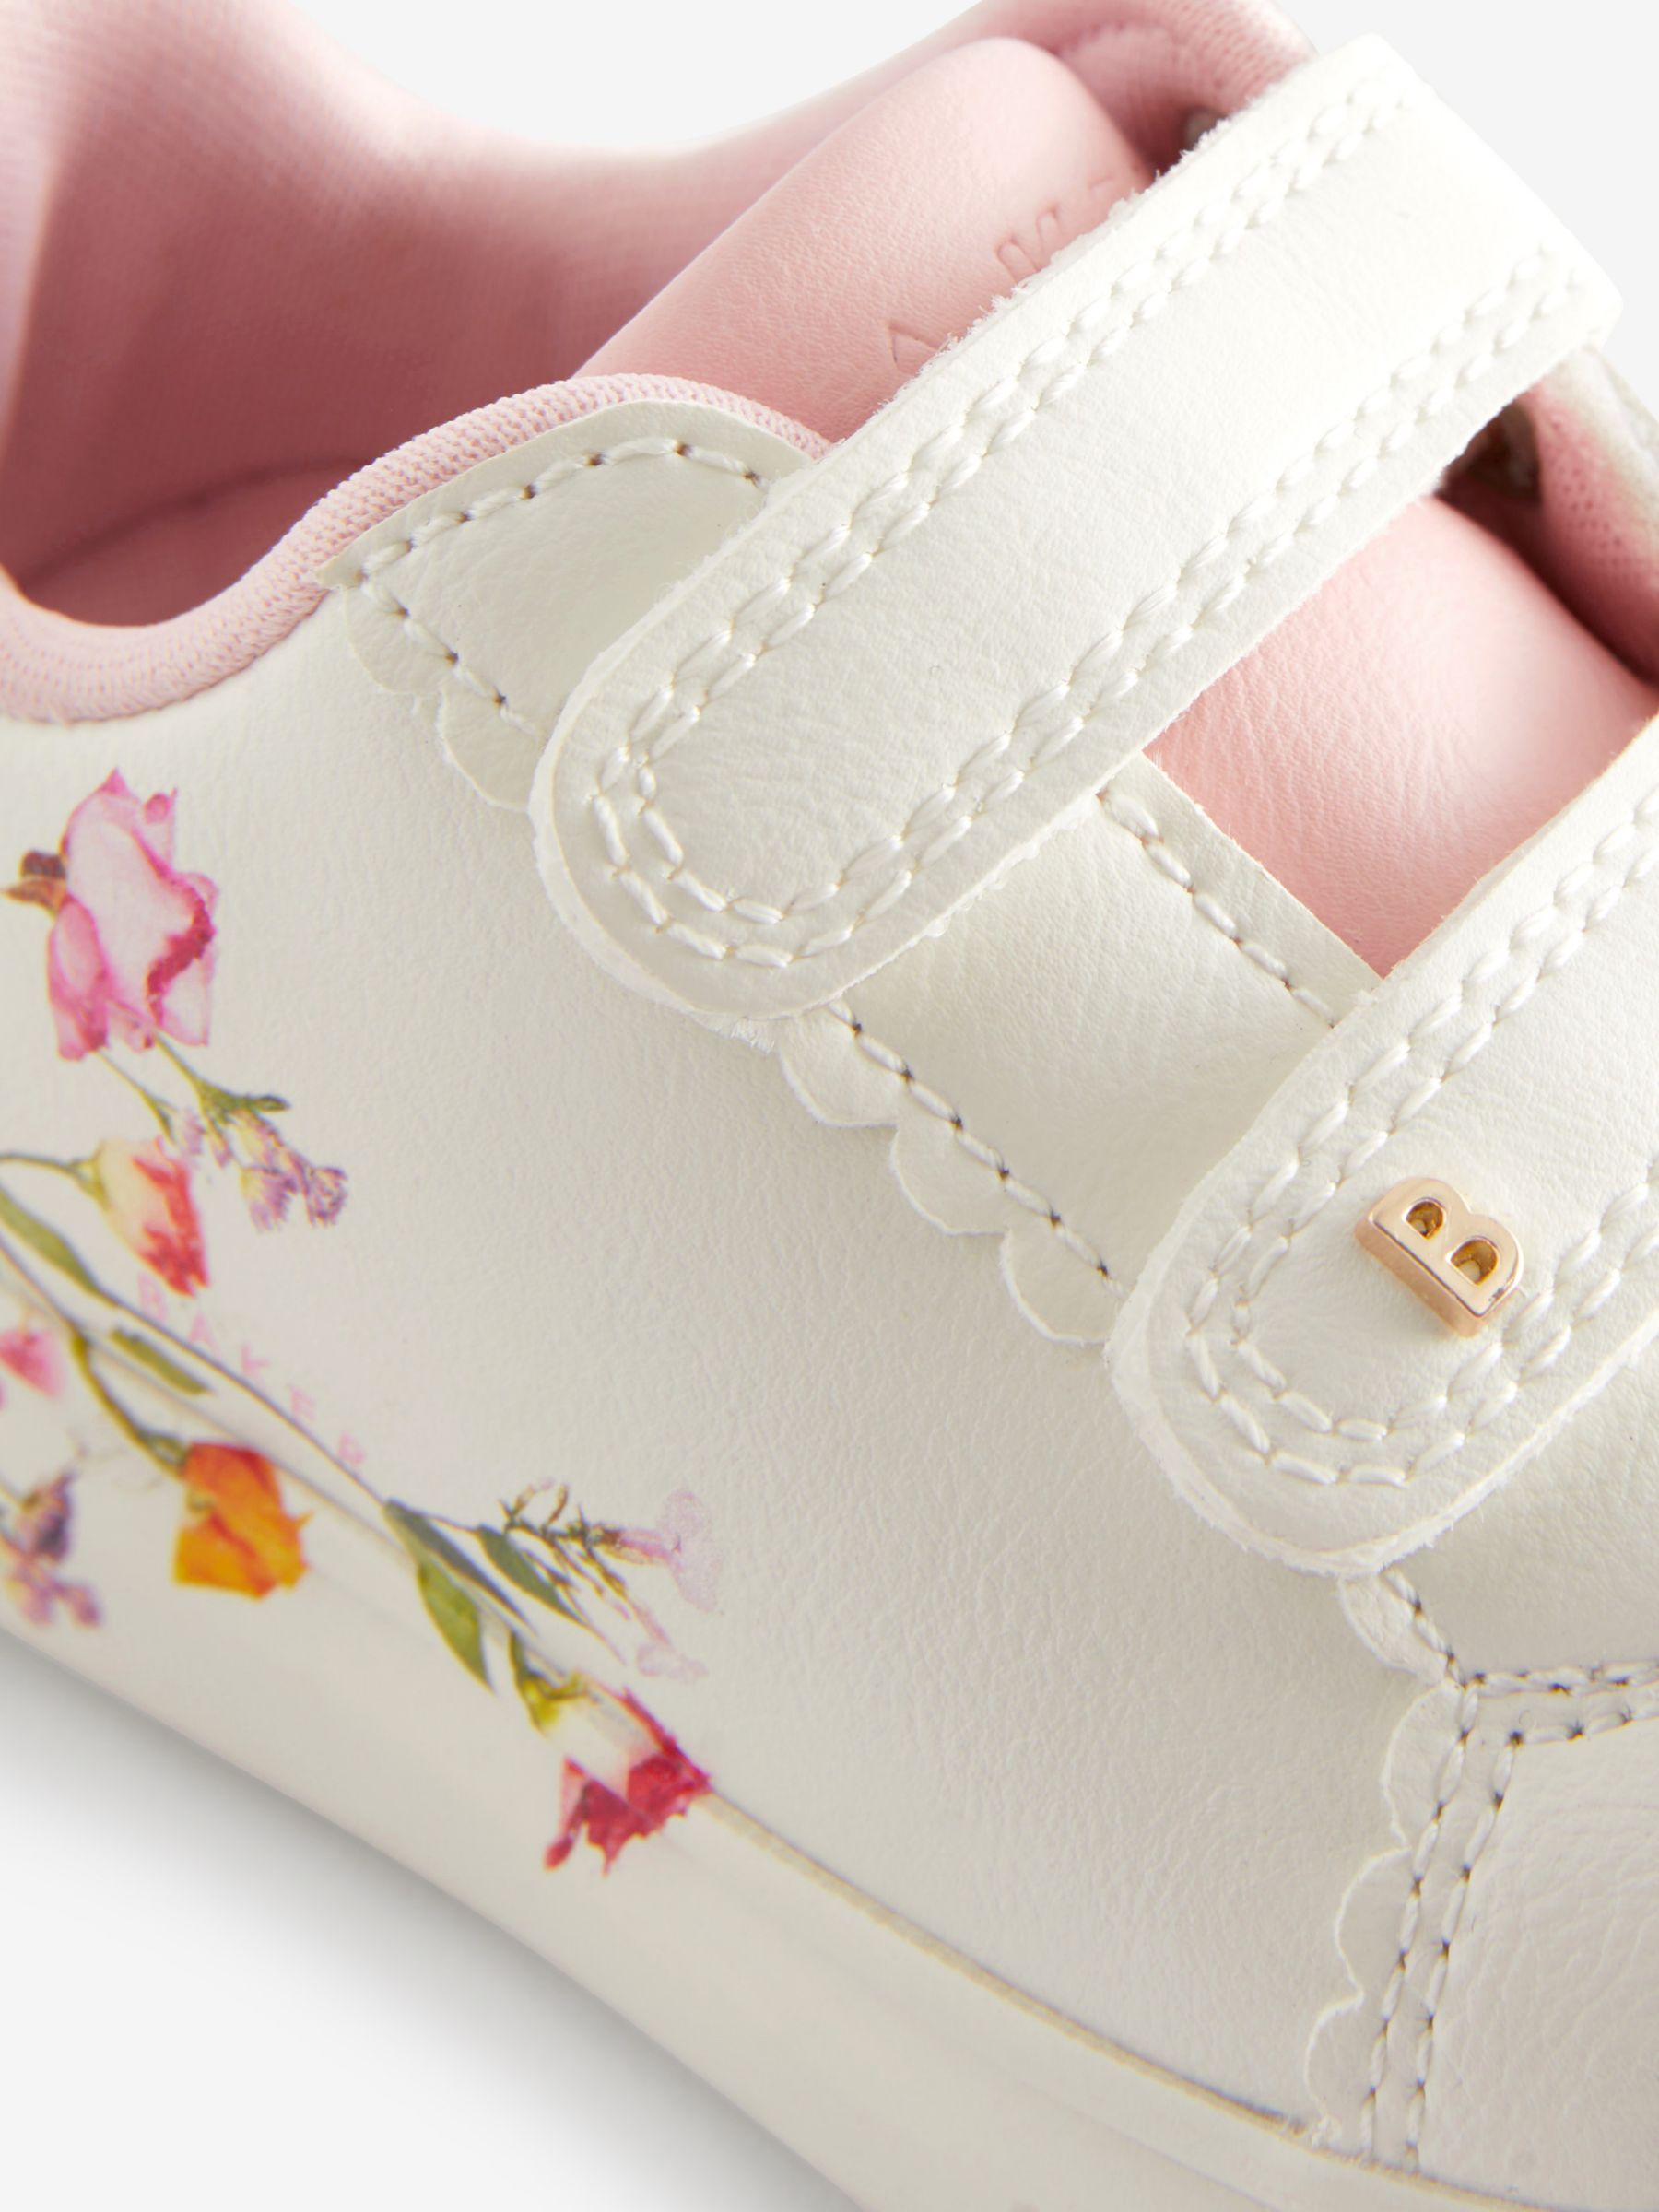 Buy Ted Baker Kids' Floral Print Chunky Trainers, White Online at johnlewis.com